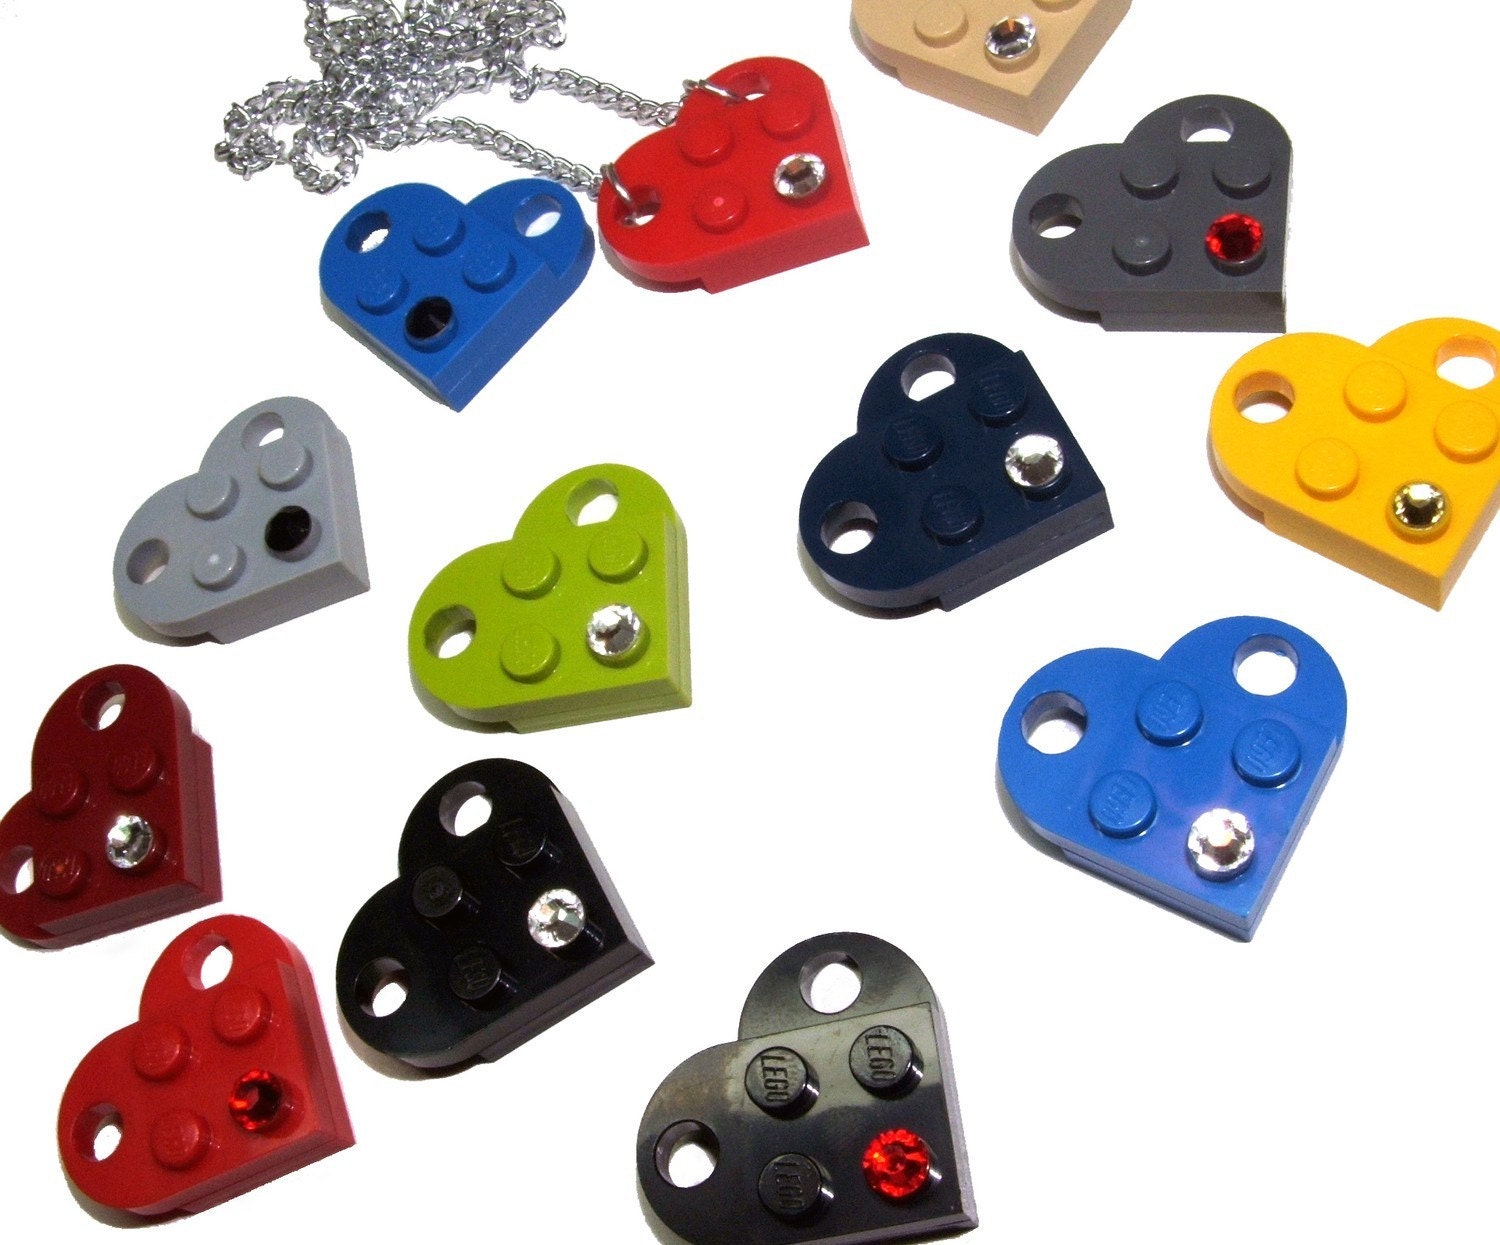 Heart made from Lego with Crystal on Silver-Tone Curb Chain, Swarovski Crystal Elements - You Choose Colors